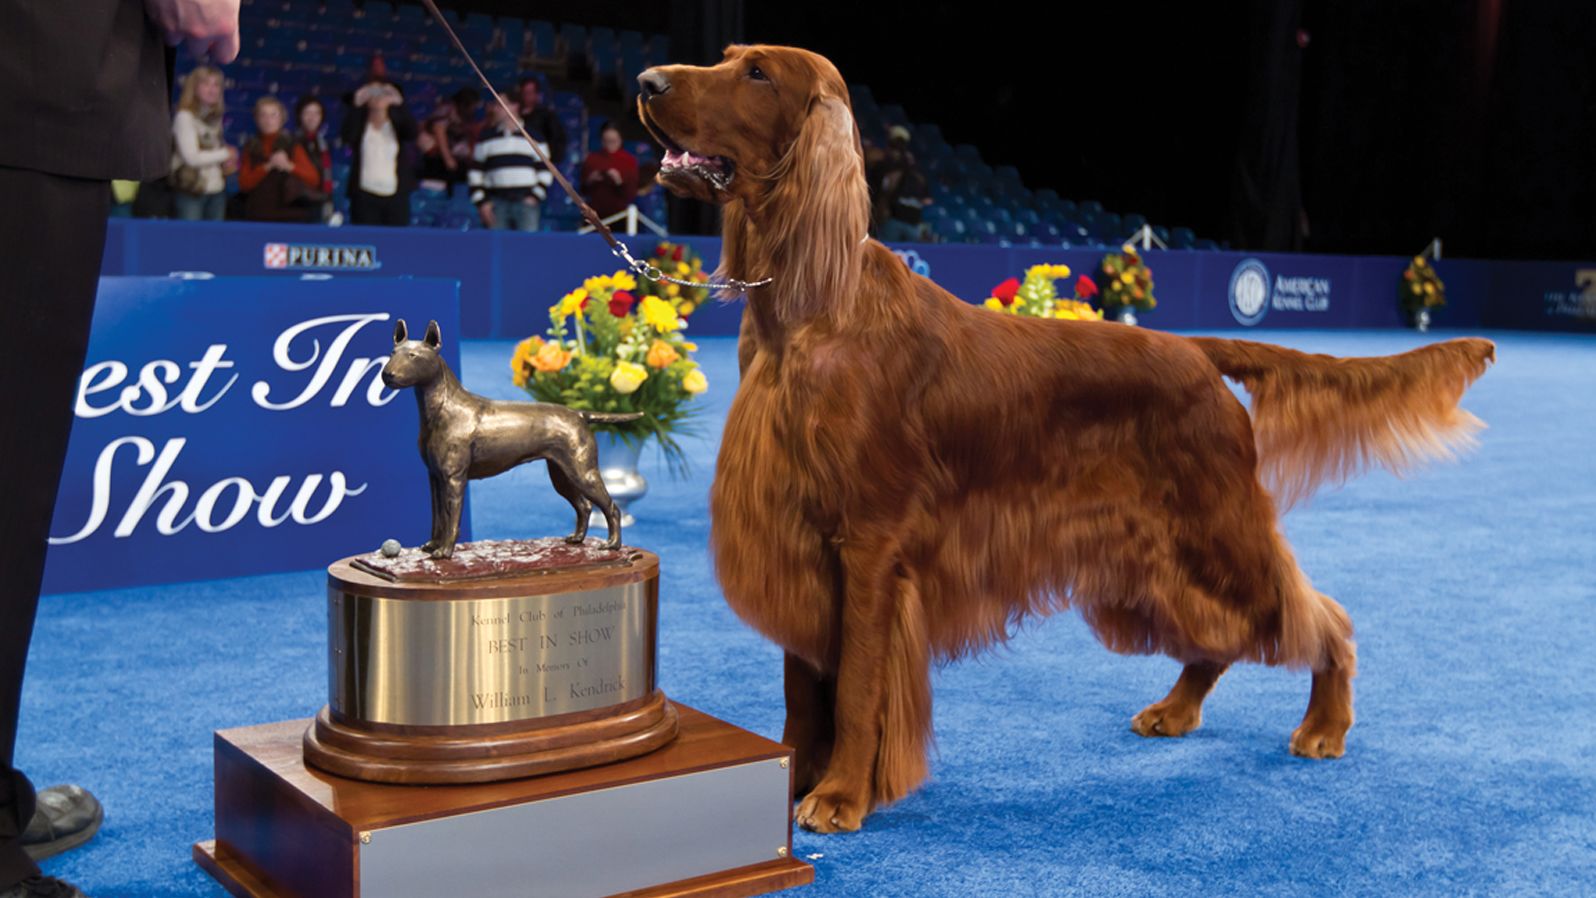 Revisit these BestinShow Winners just in time for the National Dog